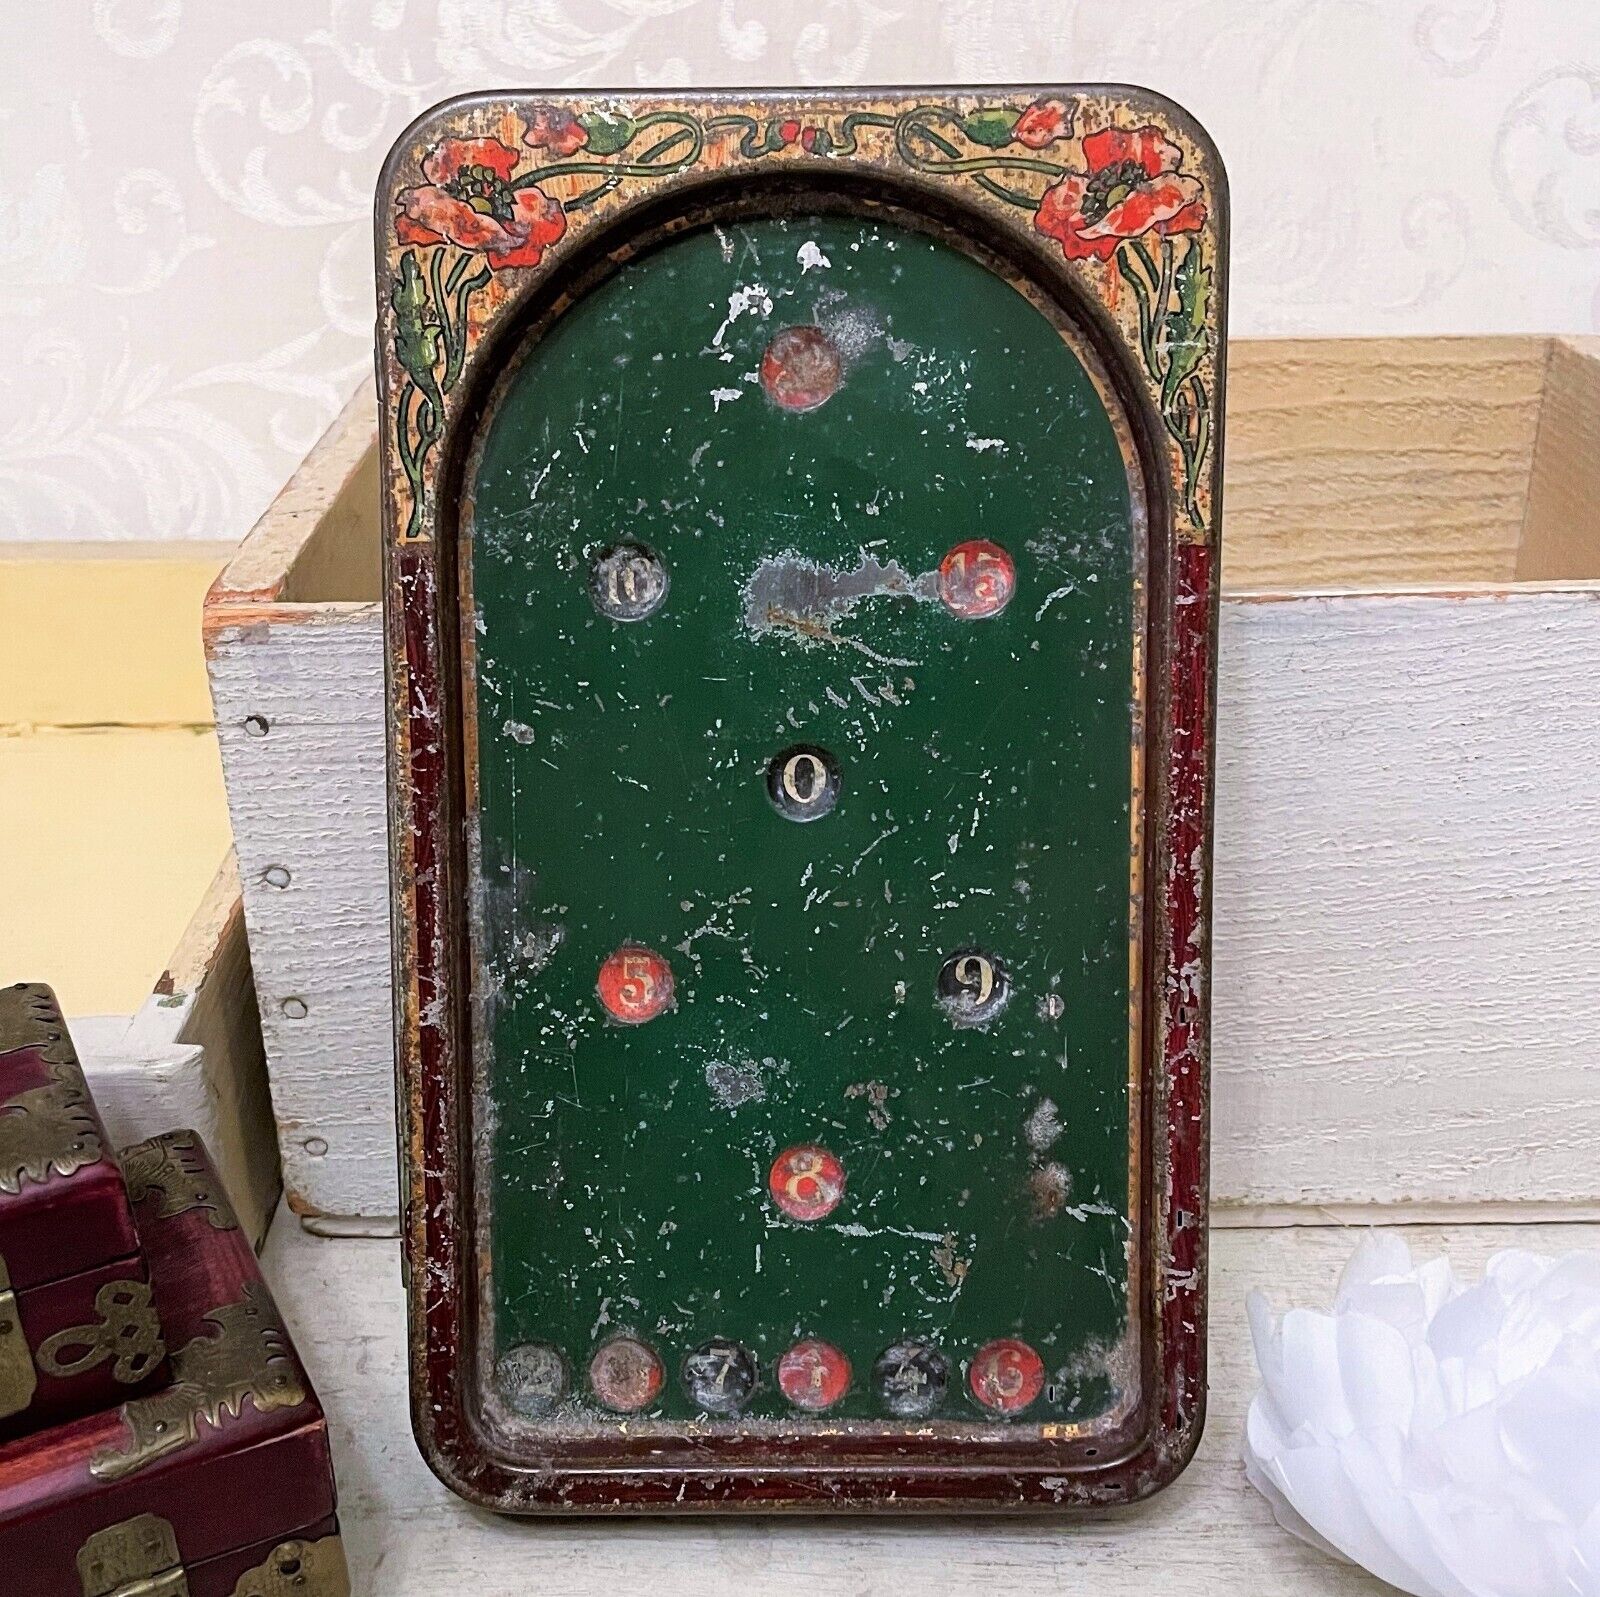 Rare Olibet French Antique Biscuit Tin Bagatelle c 1904 Pinball SHABBY Vintage